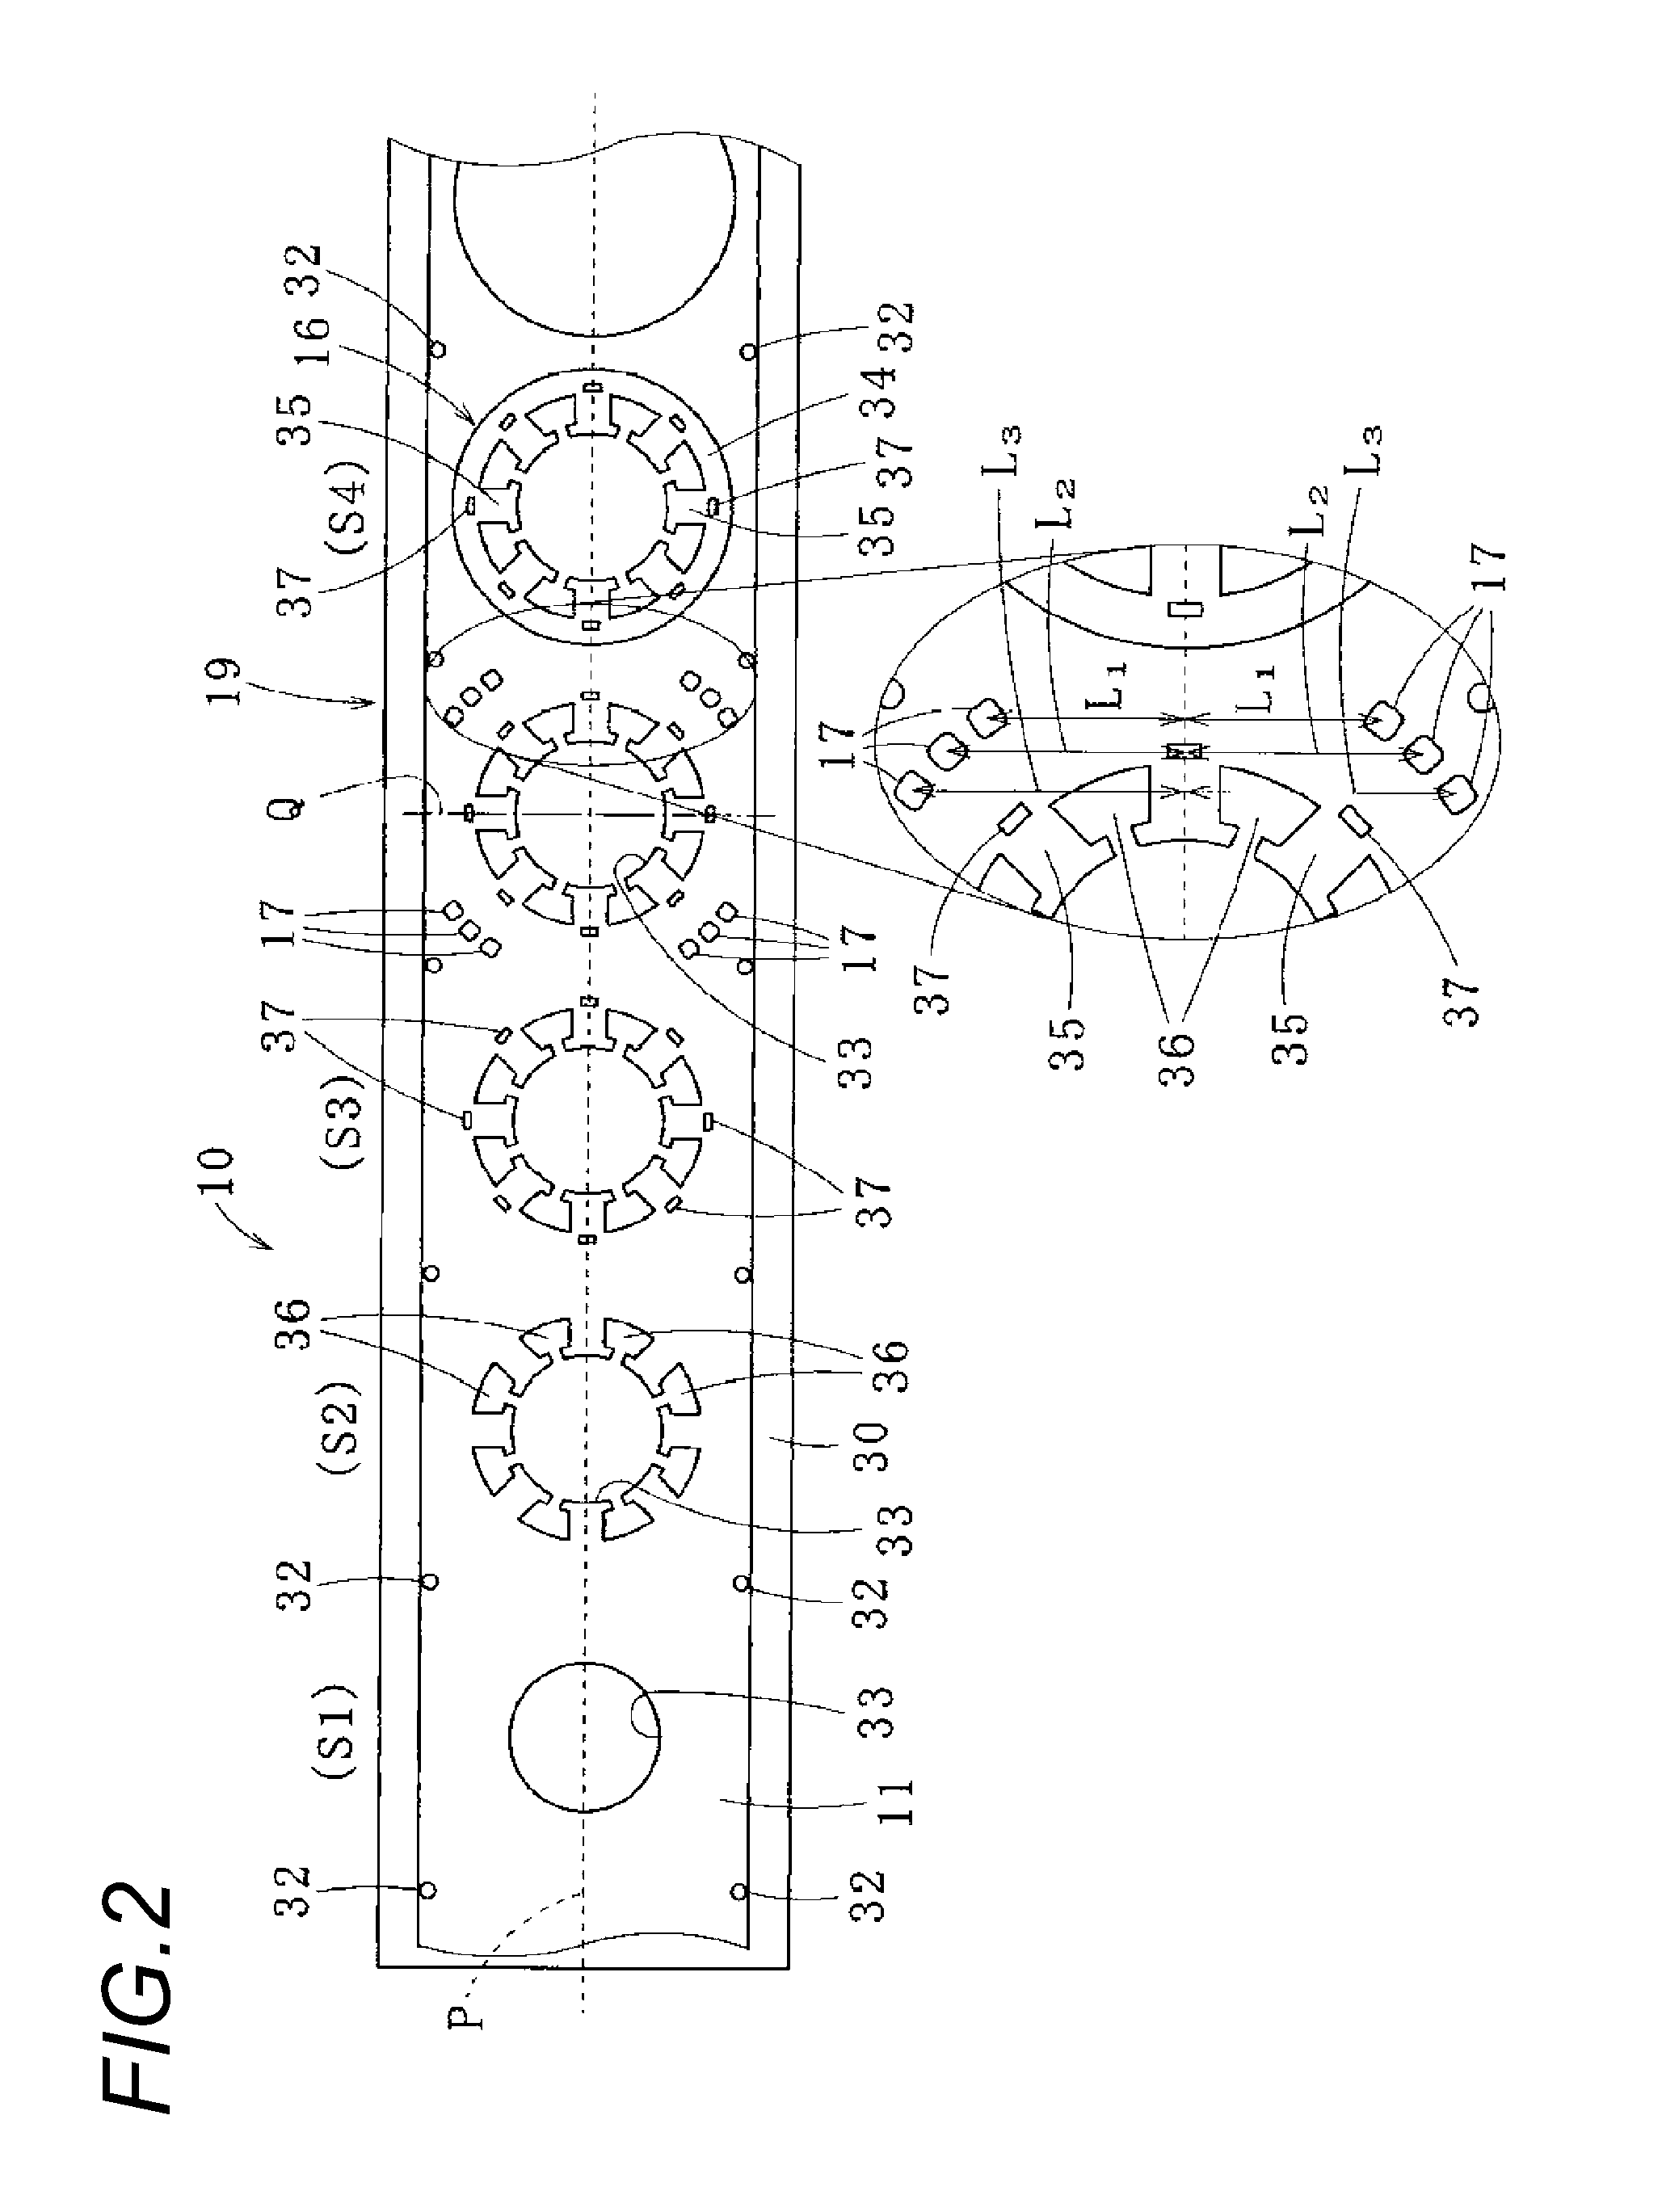 Laminated iron core manufacturing method and blanking die apparatus